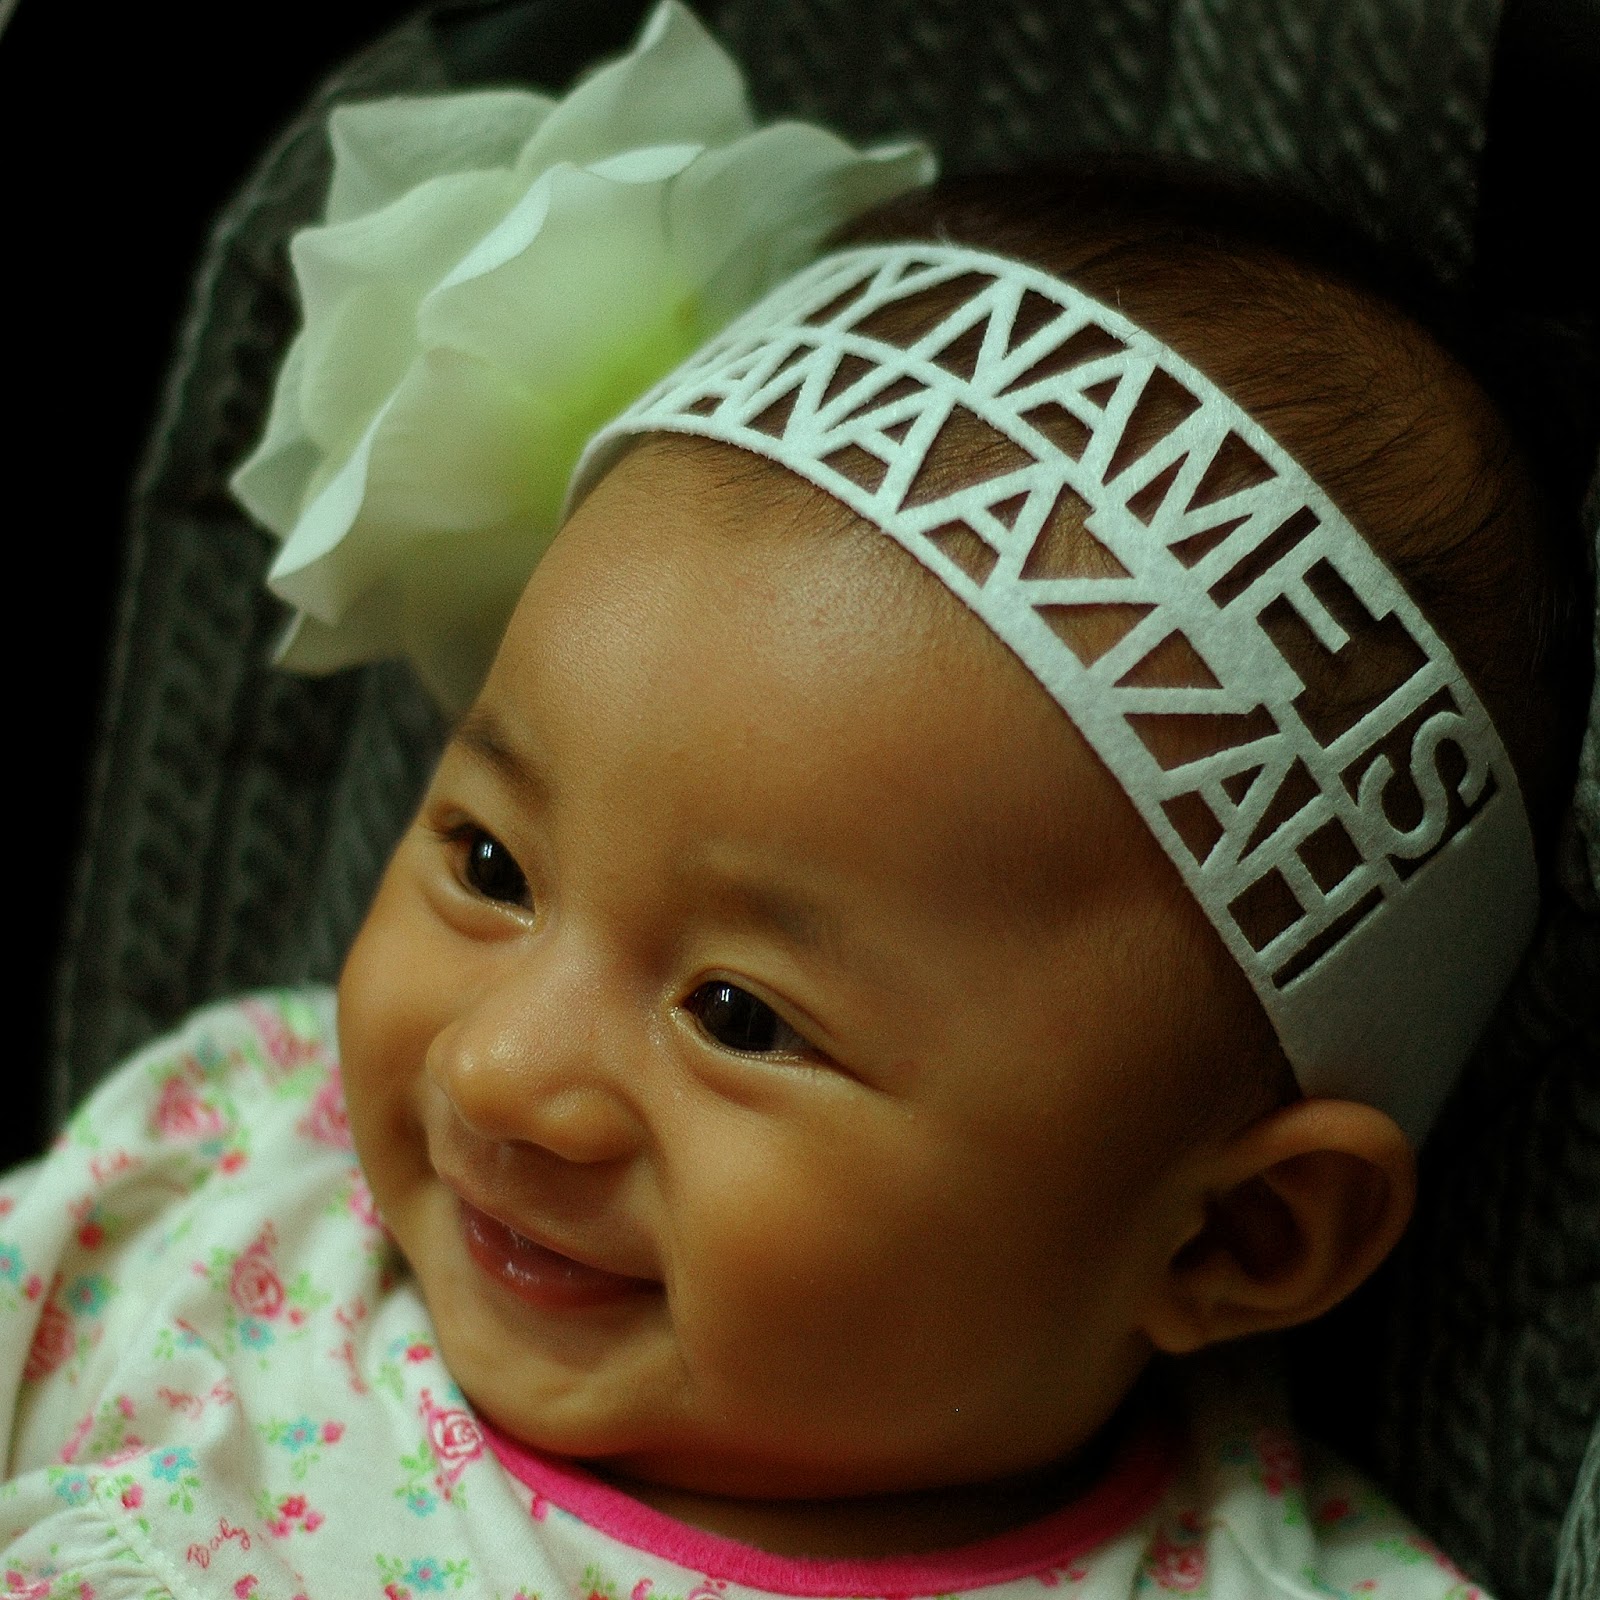 833 New baby headbands ridiculous 693 Later, even Aunty Dee want her own laser cut headband~ 